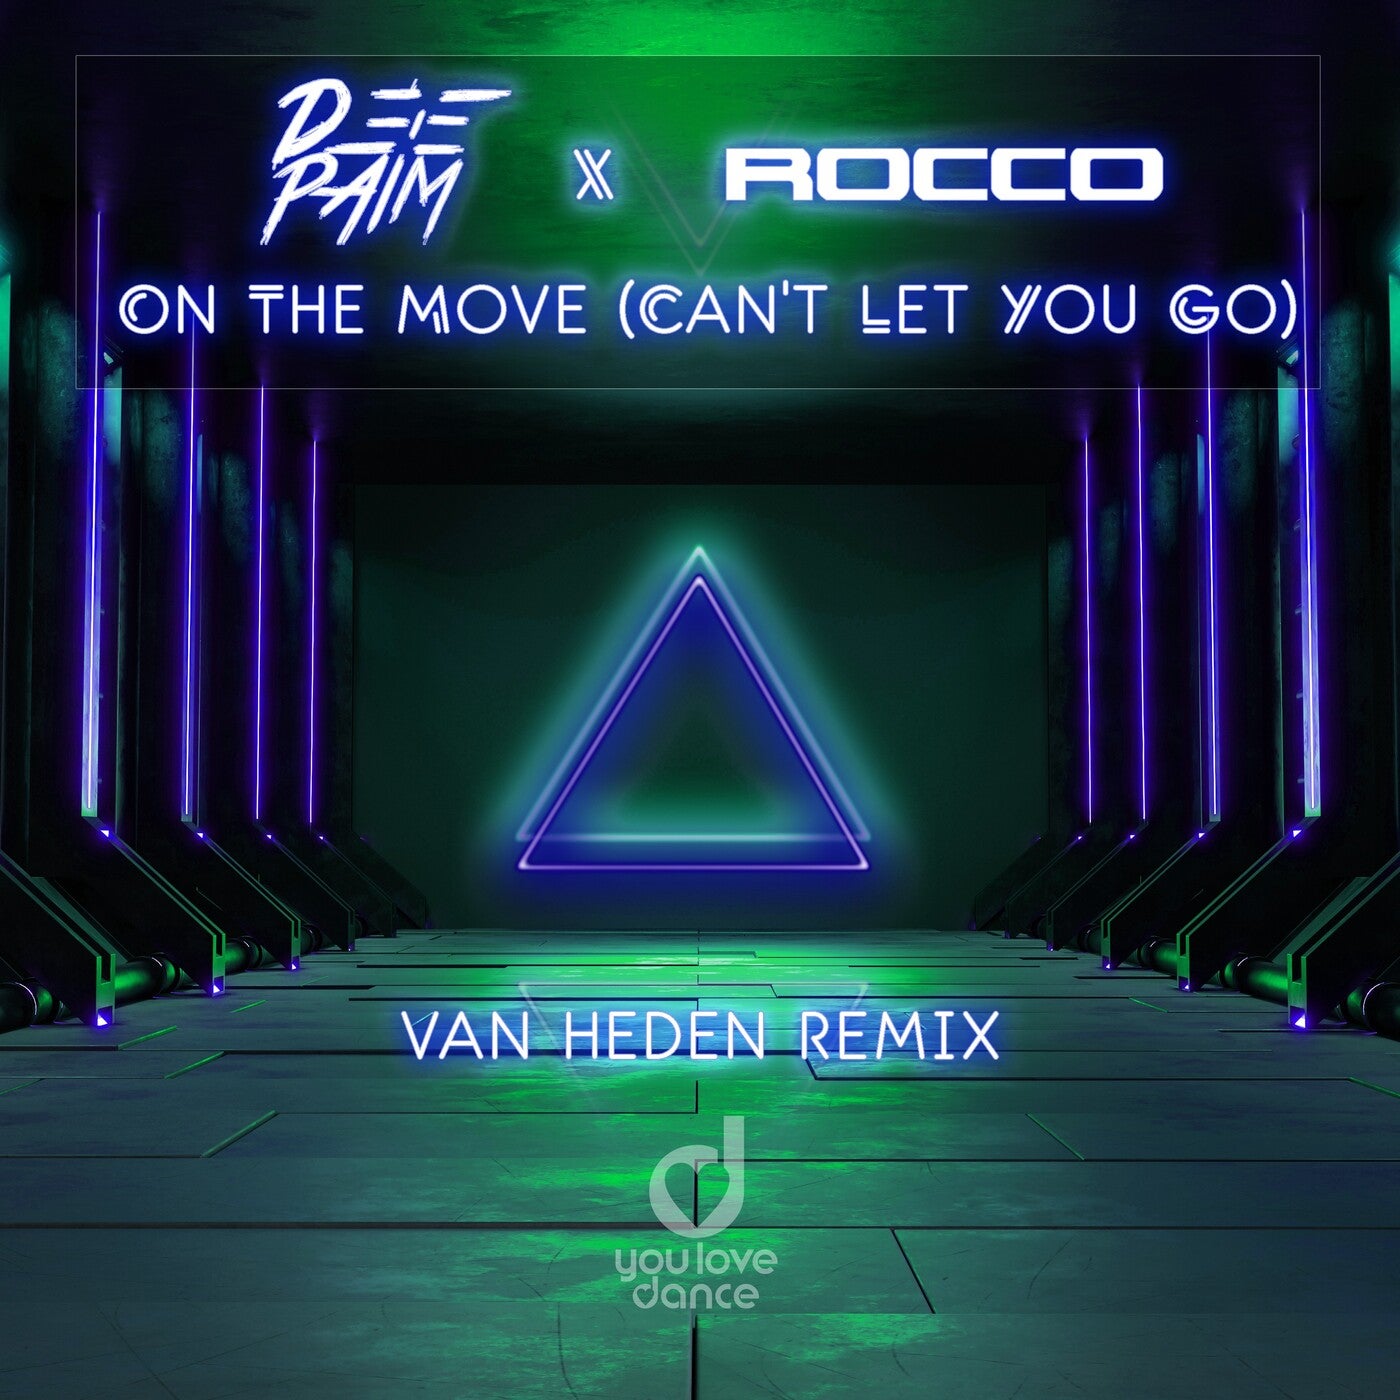 On The Move (Can't Let You Go) [Van Heden Remix]